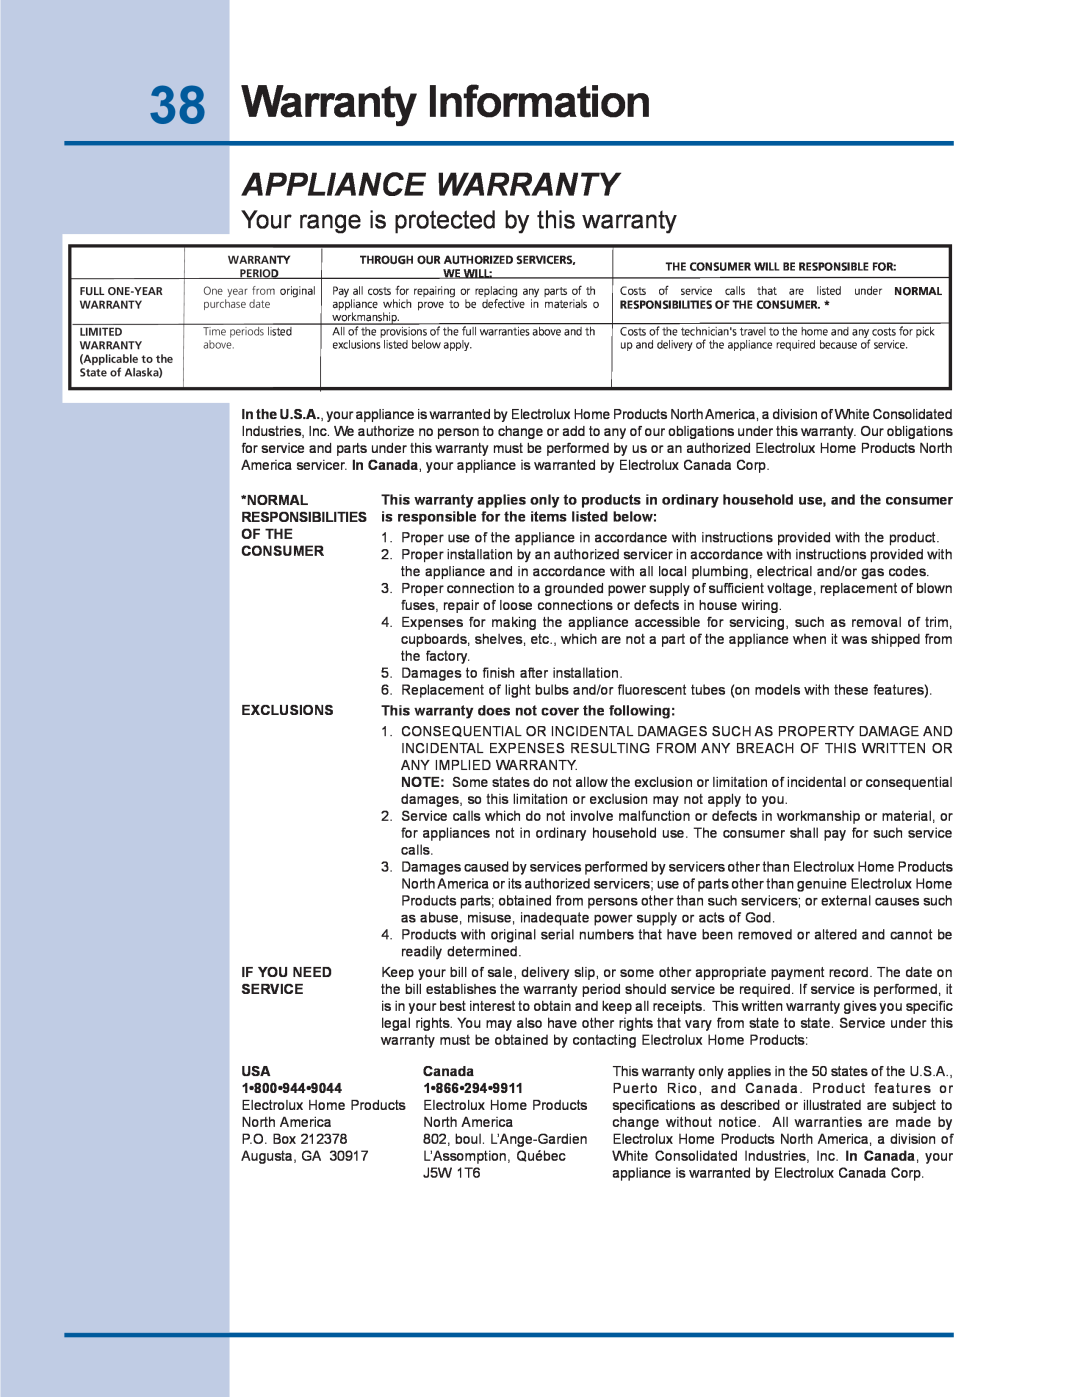 Electrolux E36DF76GPS manual 38Warranty Information, Appliance Warranty, Your range is protected by this warranty, Canada 